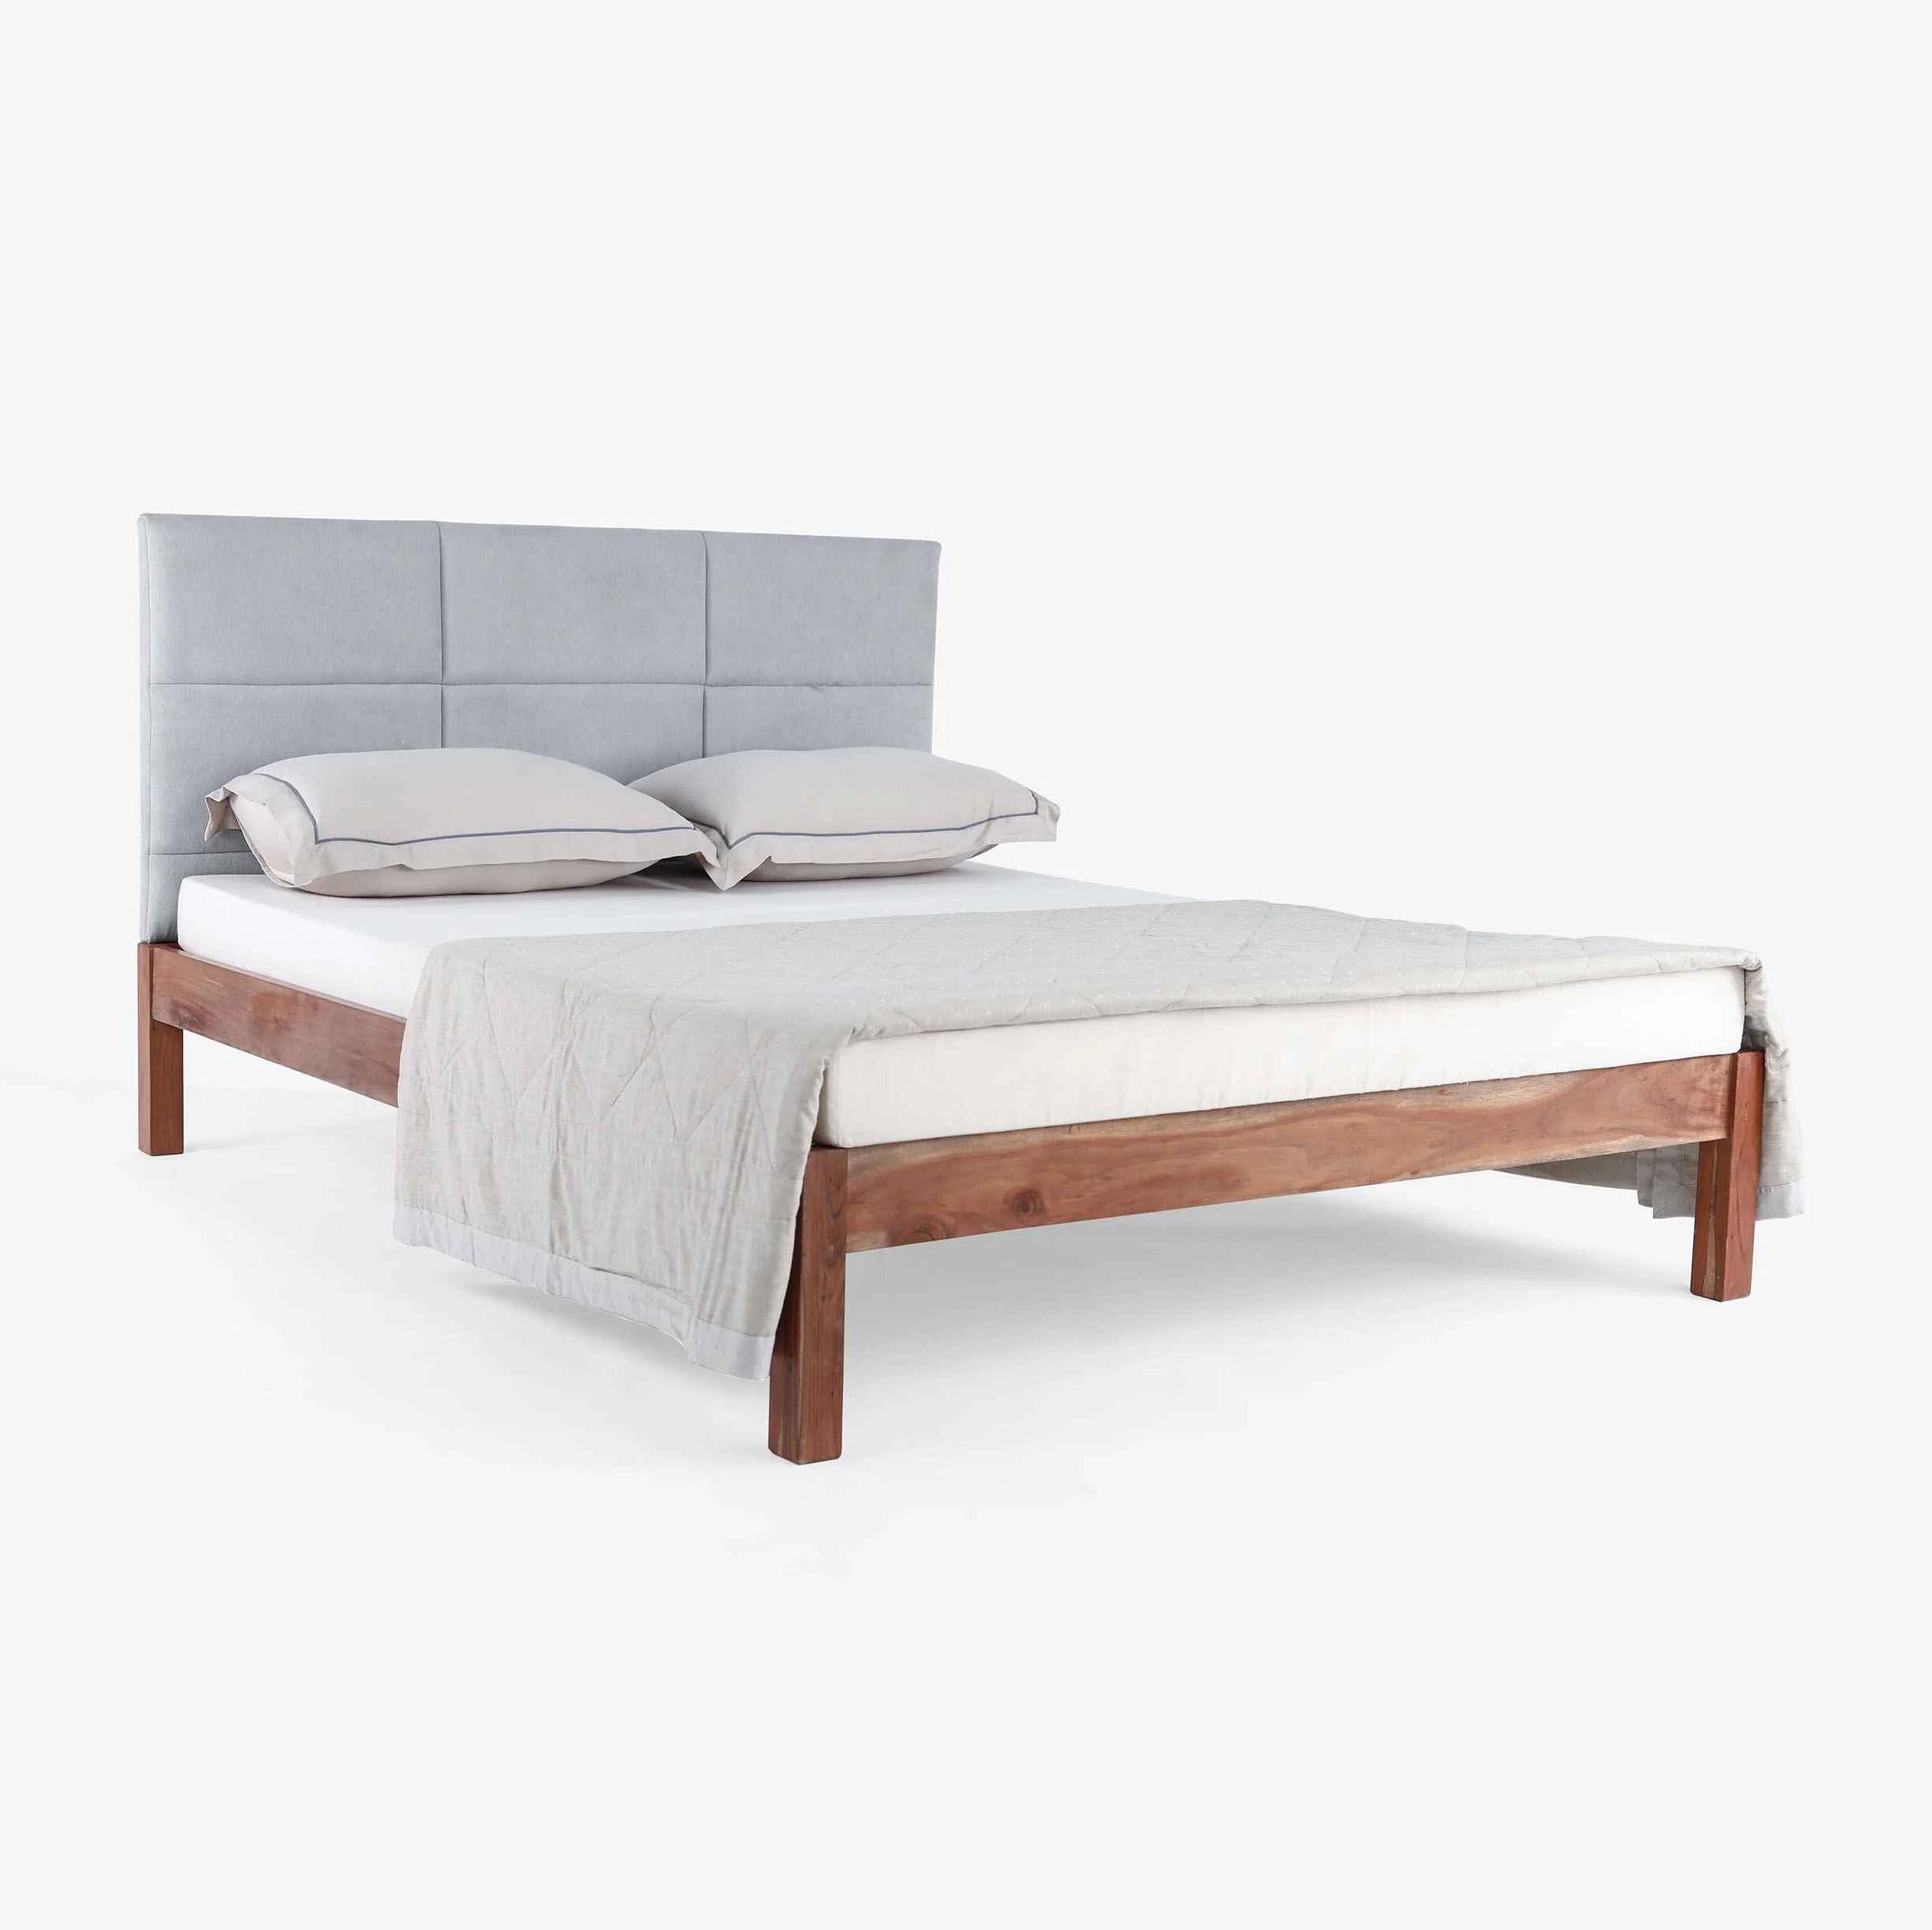 EGAL INLAY BED